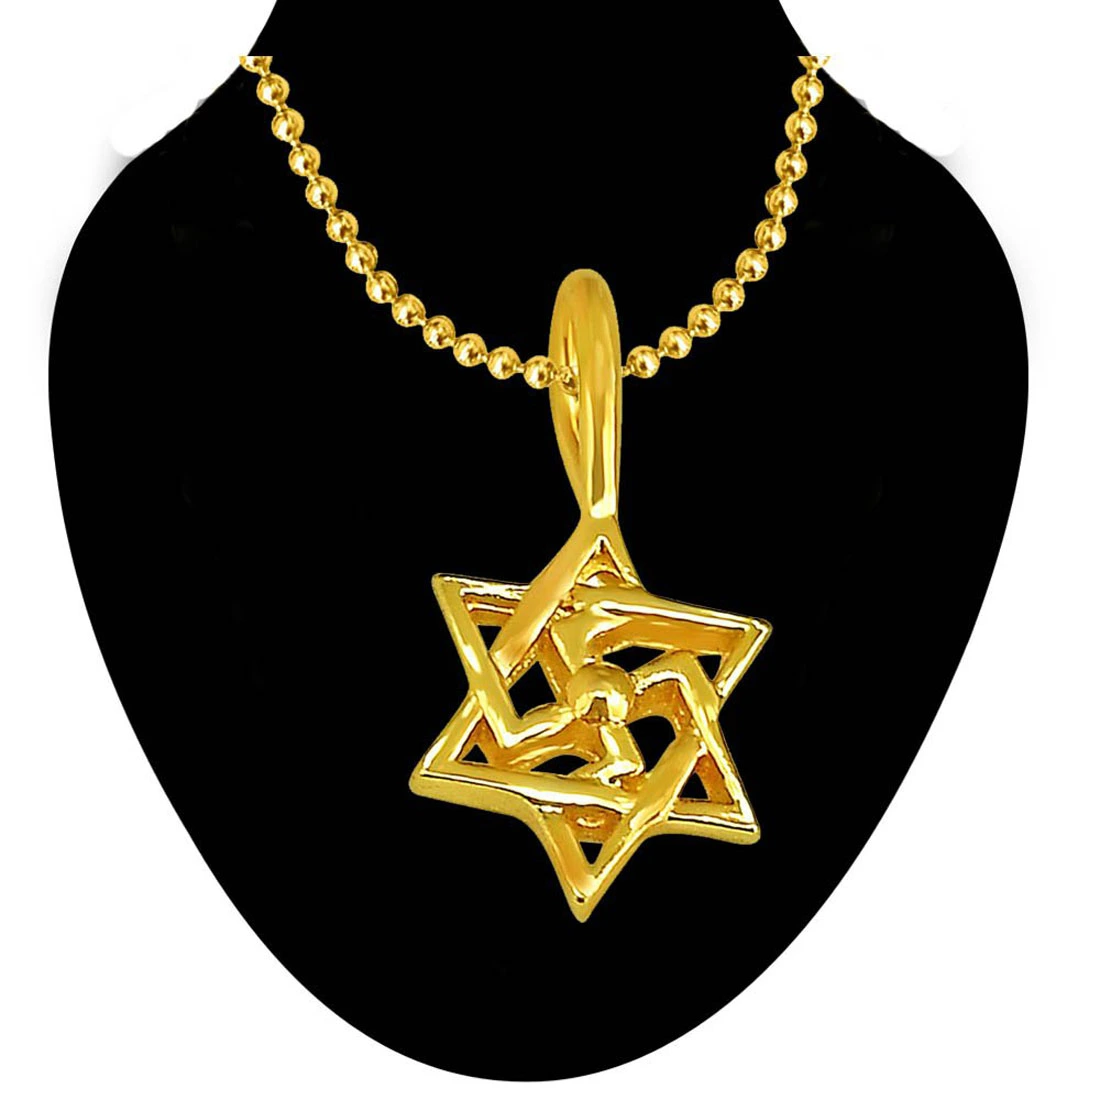 Swastik Shaped Gold Plated Sterling Silver Pendant with Gold Plated Chain for All (SDS193)